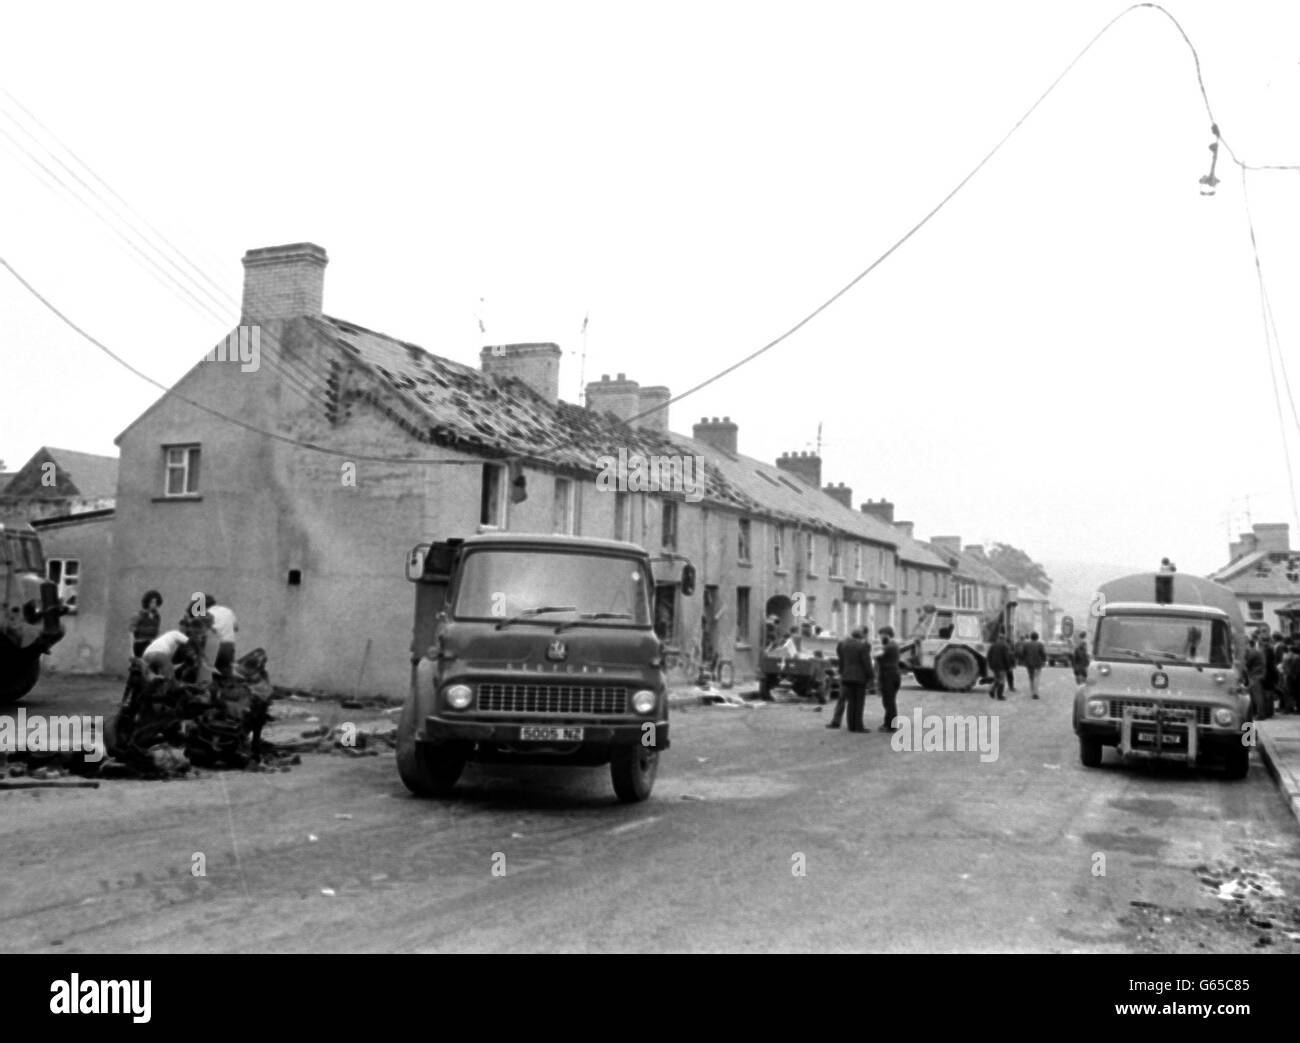 Once a peaceful Ulster village, now a street of destruction. This was Claudy, as men with lorries did what they could to clear up after the car bomb blasts which killed six people. Stock Photo